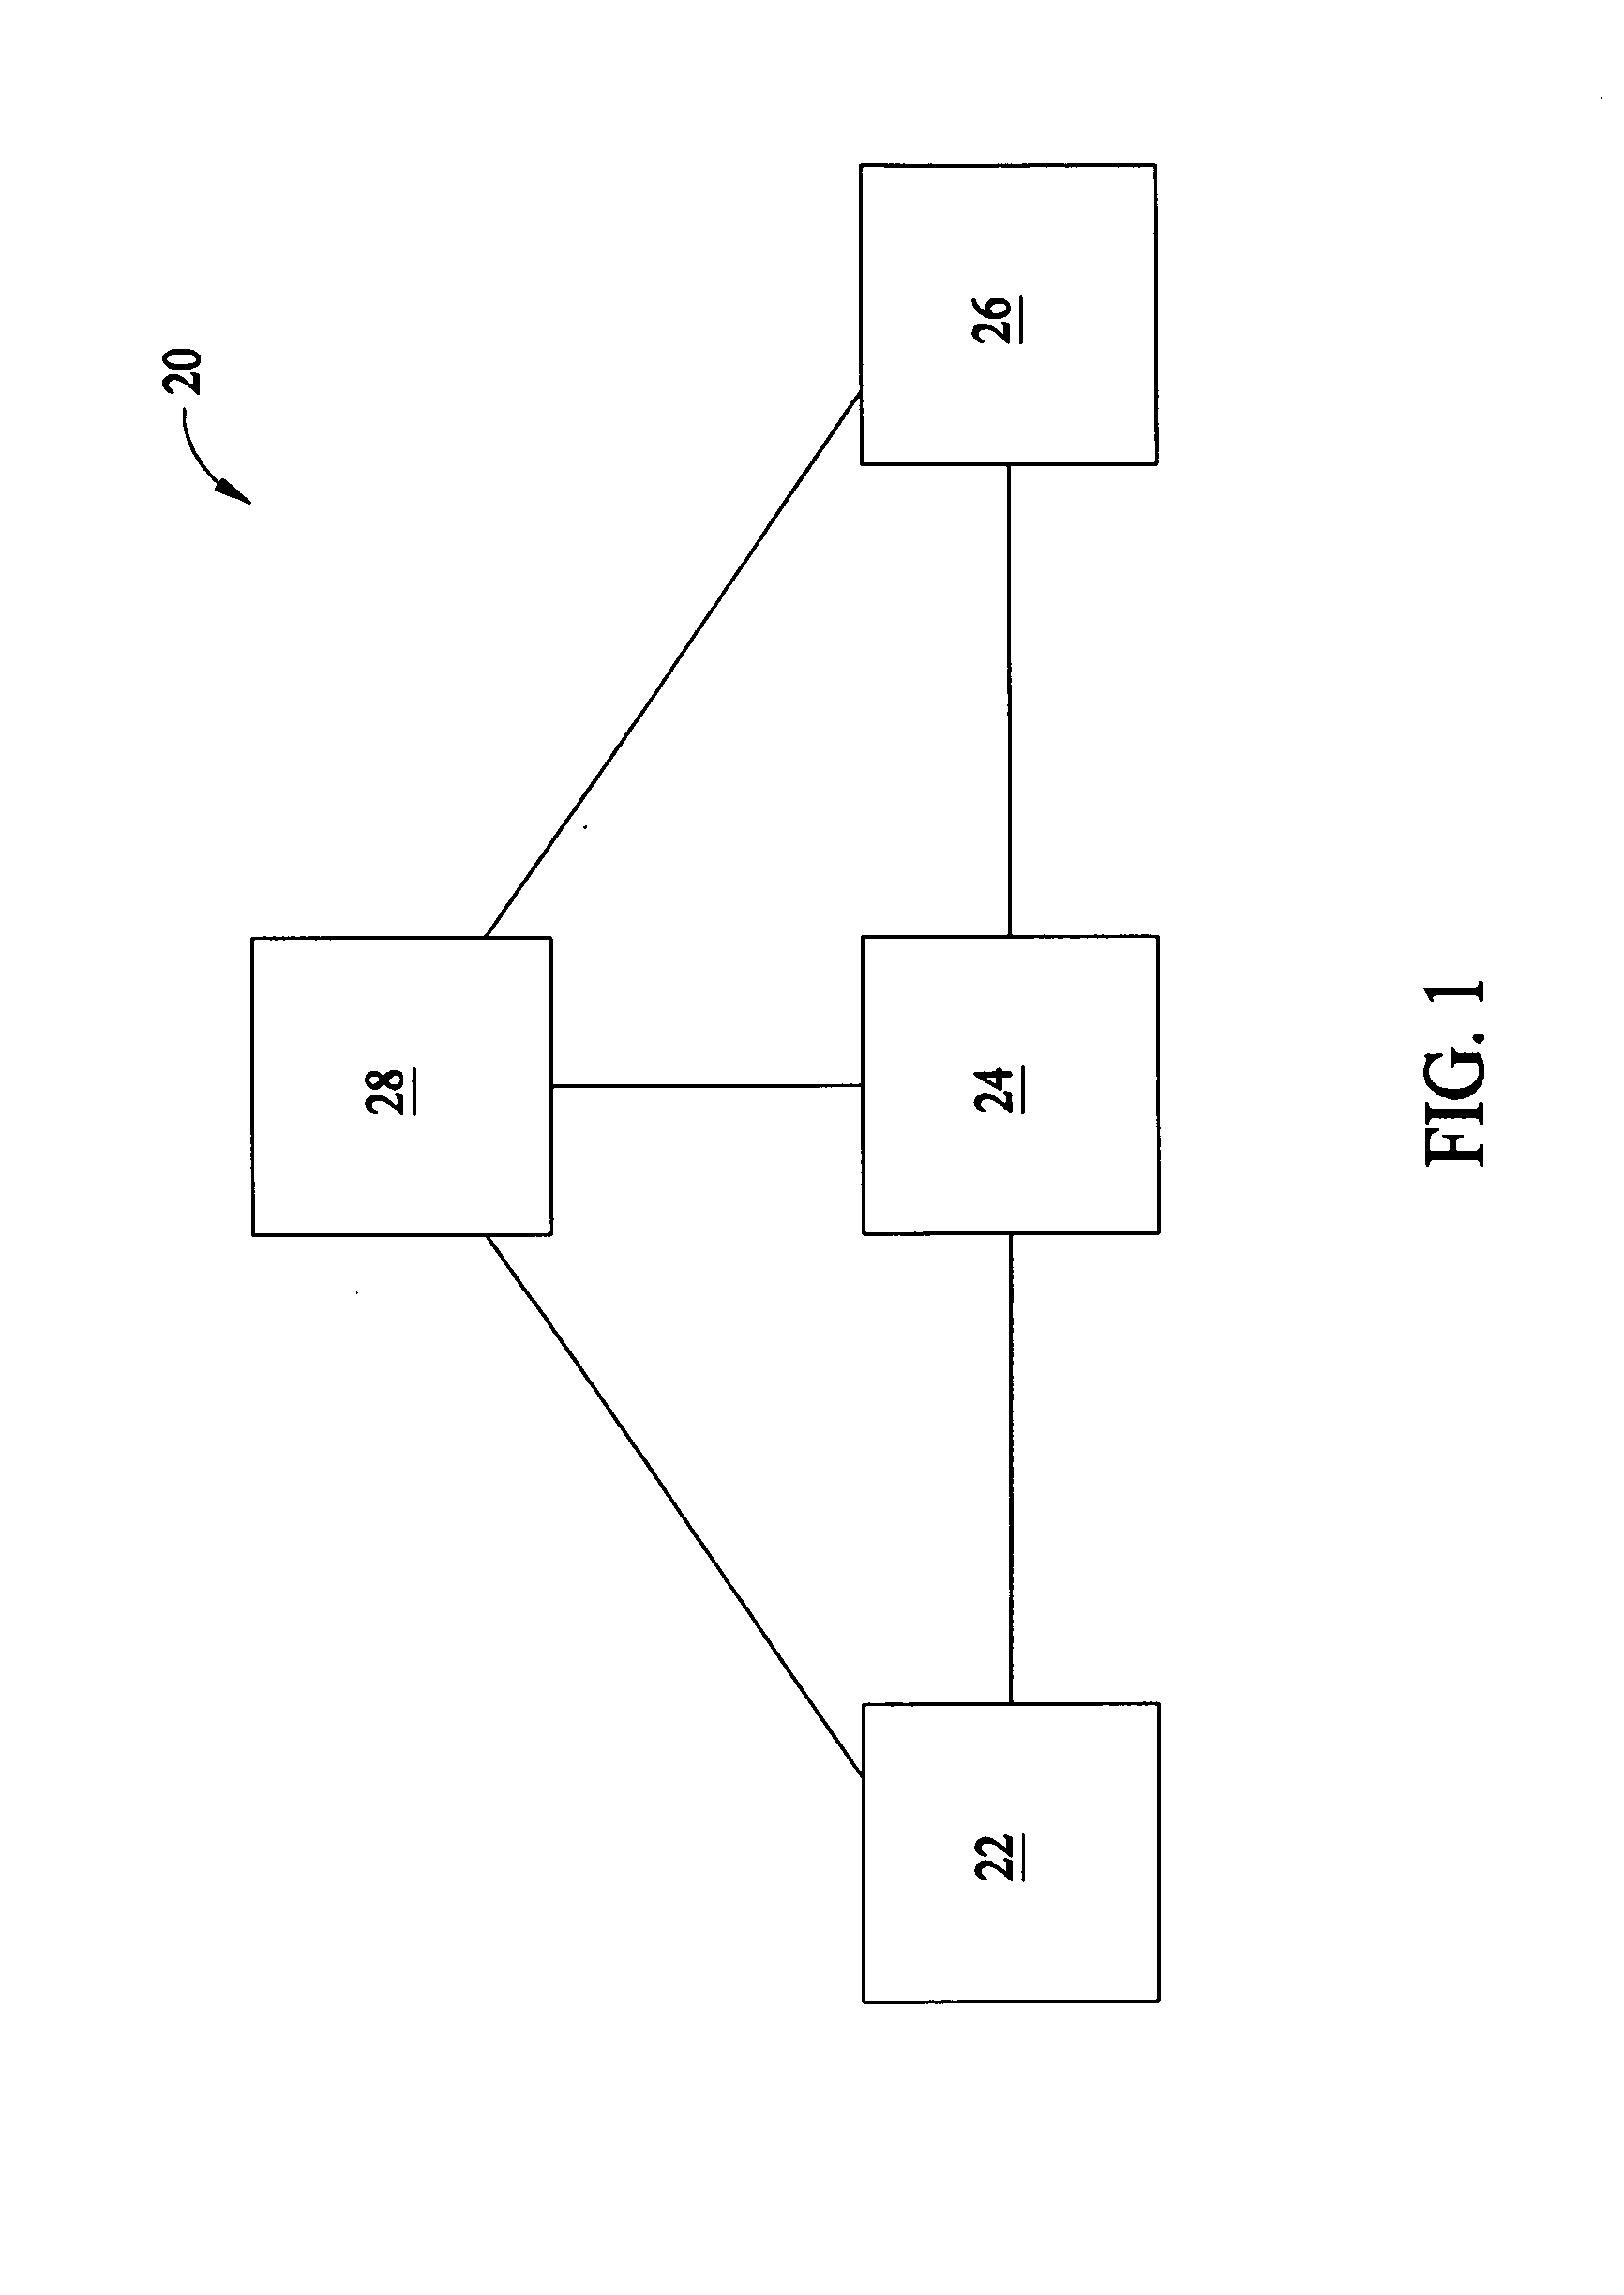 Methods and systems for generating electrical power